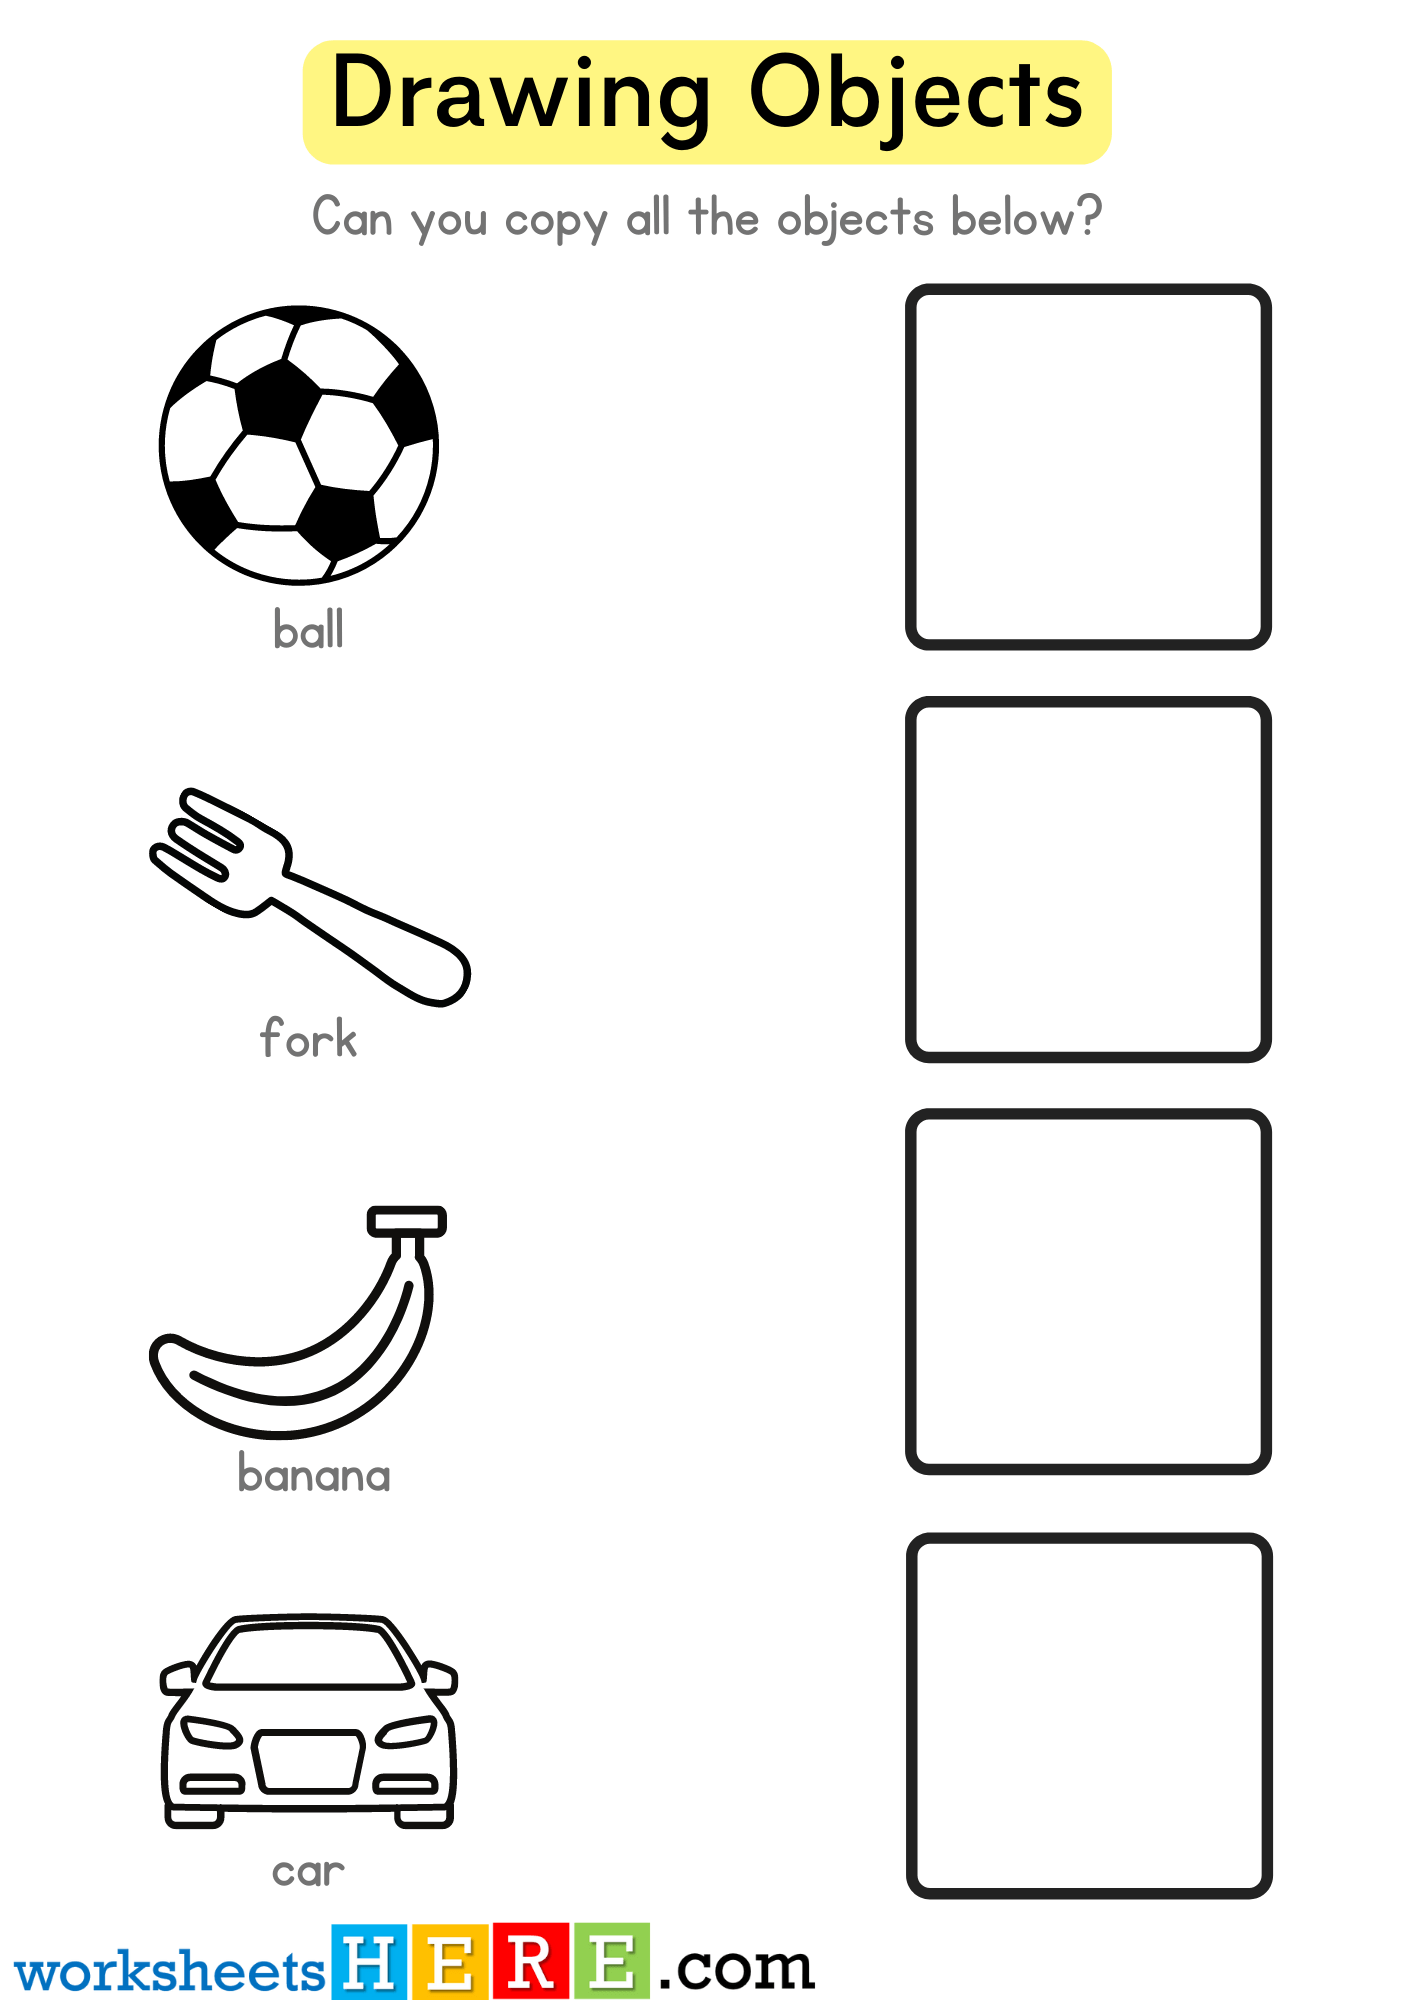 Copy All the Objects Below, Drawing Examples Worksheet For Students